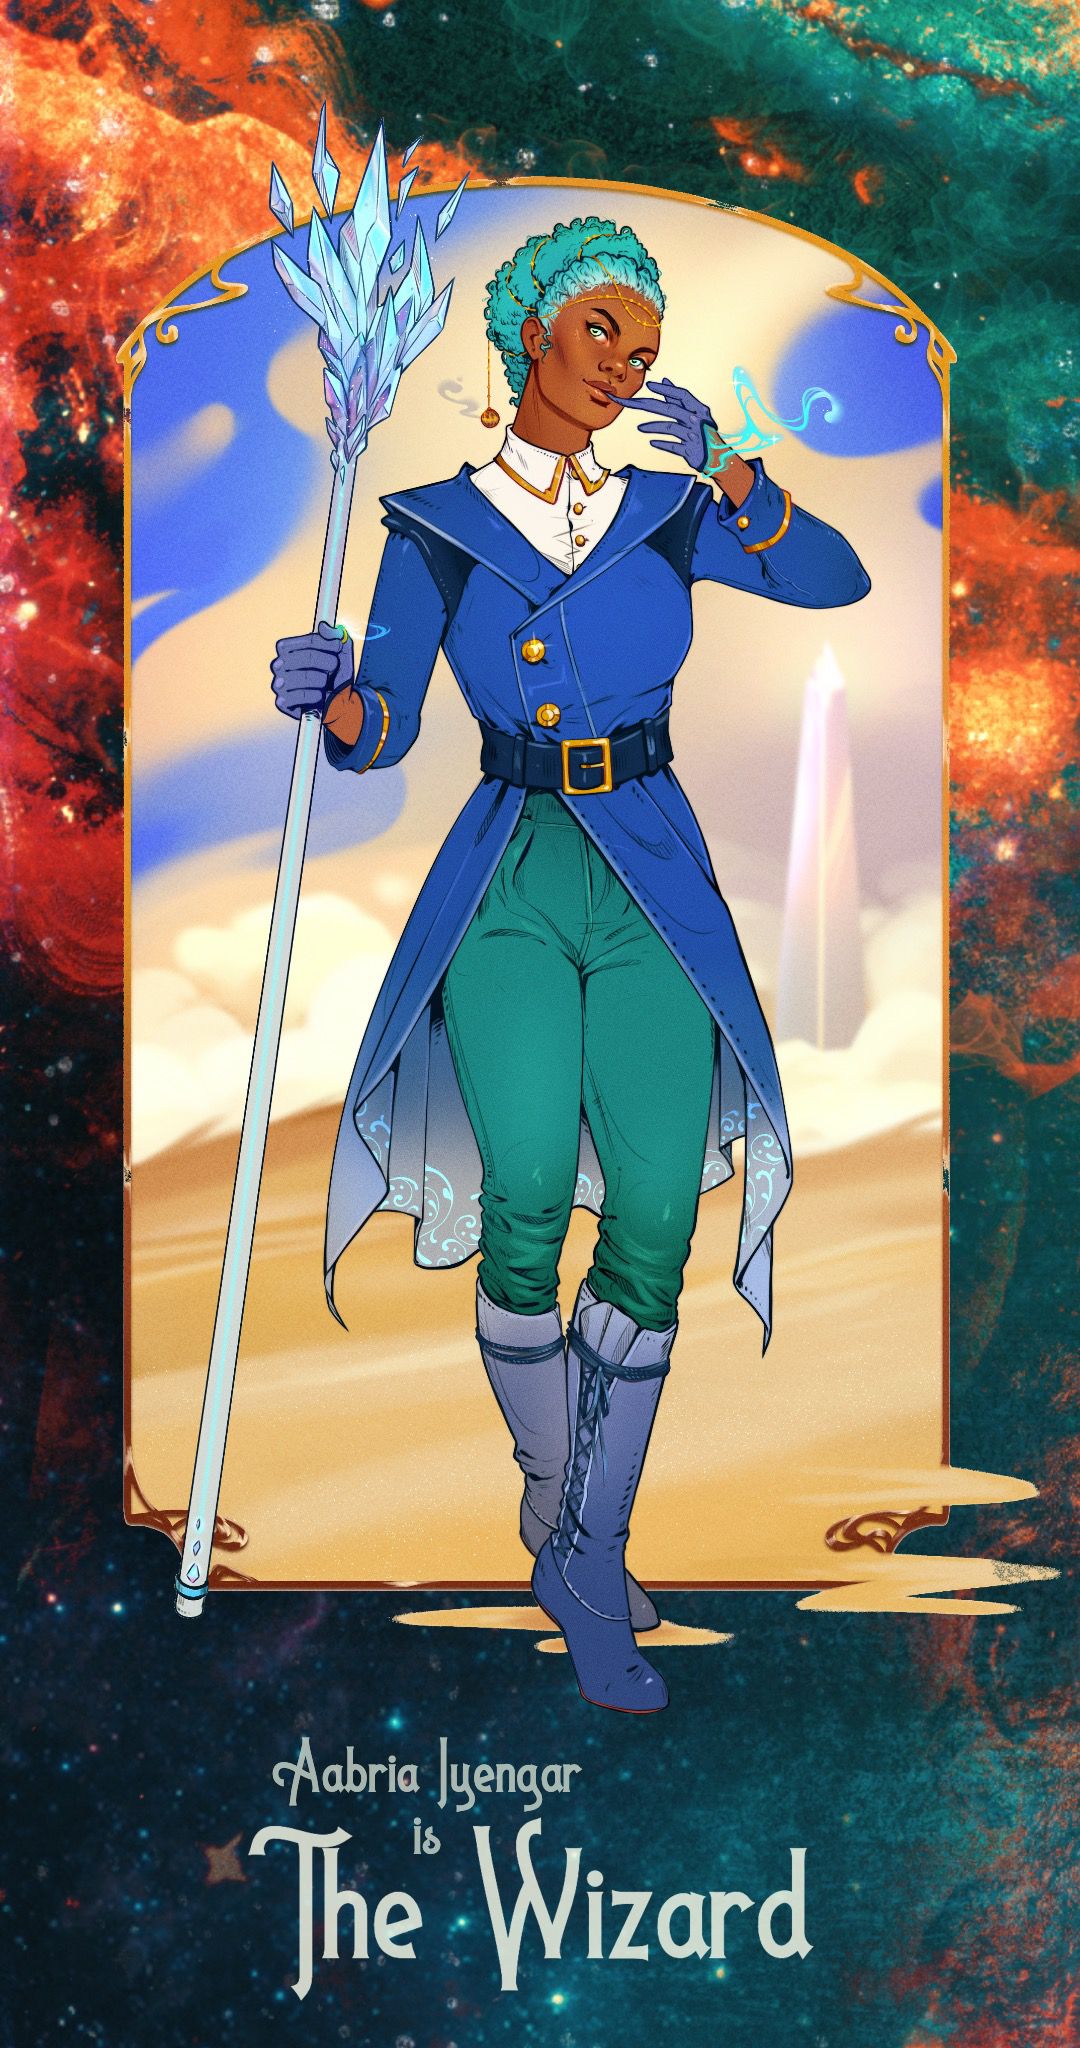 A wizard with light blue hair holds a white staff with a crystaline top. Whisps of vapor leak from beneath her gloves, while in the background a mysty desert-like landscape rolls to the horizon. Sand spills out of the frame into the foreground.